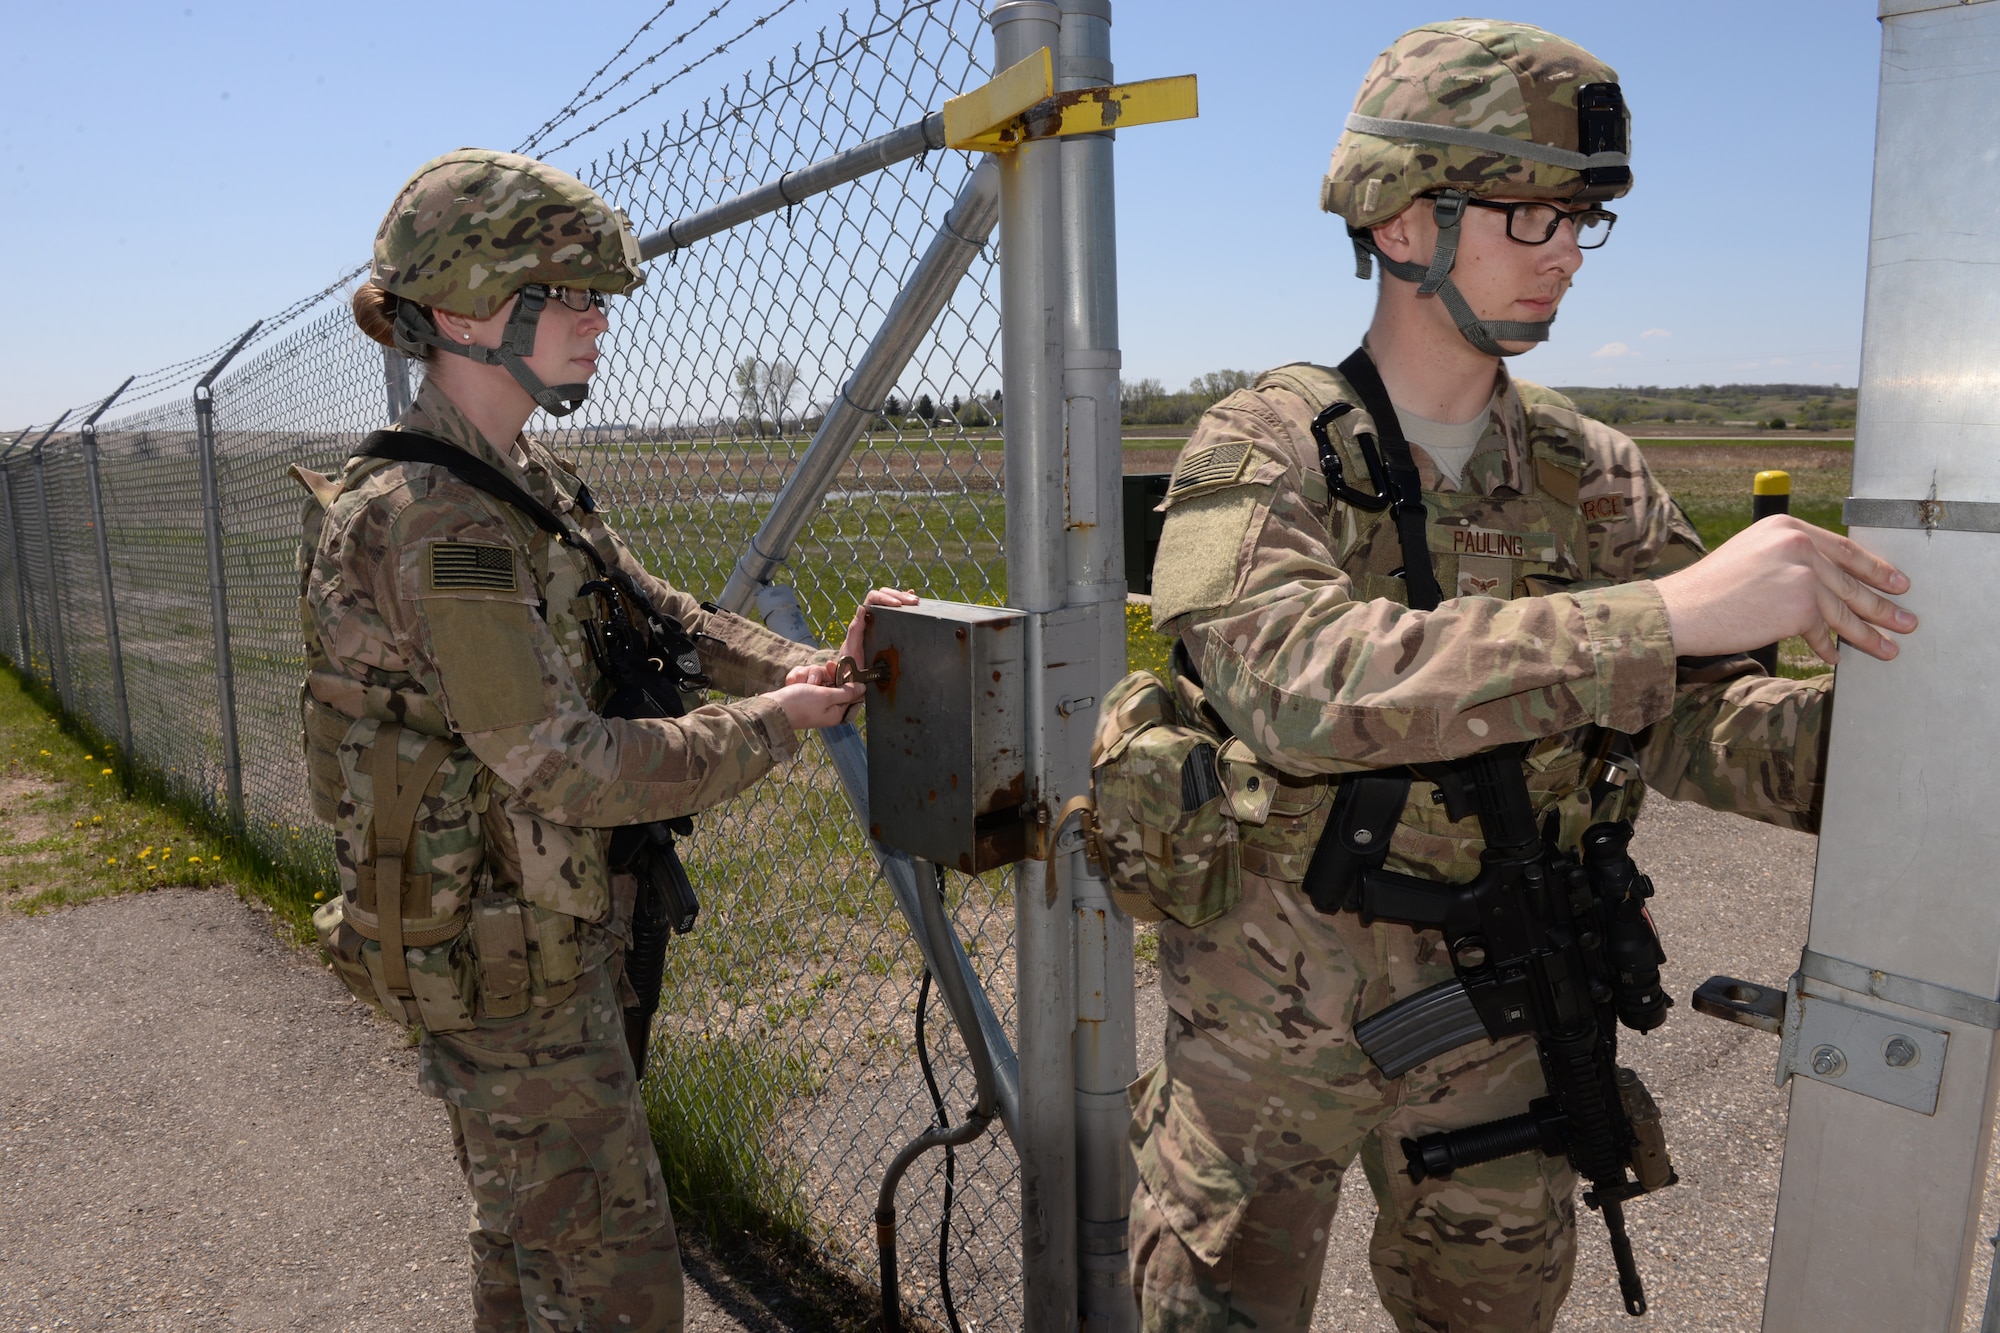 Members of the 219th Security Forces Squadron from left to right Airman 1st Class Angela Lage and Airman 1st Class Alex Pauling pass through a gate at a Minot Air Force Base, North Dakota, missile alert facility May 20, 2015, as they sweep the area for anything suspicious. The North Dakota Air National Guard members are doing their annual training period as they perform the real-World mission of missile field security, and train for their war-time tasking mission. The Air National Guard members are routinely integrated among the U.S. Air Force active duty personnel performing missile field security in a seamless and indistinguishable manner. (U.S. Air National Guard photo by Senior Master Sgt. David H. Lipp/Released)